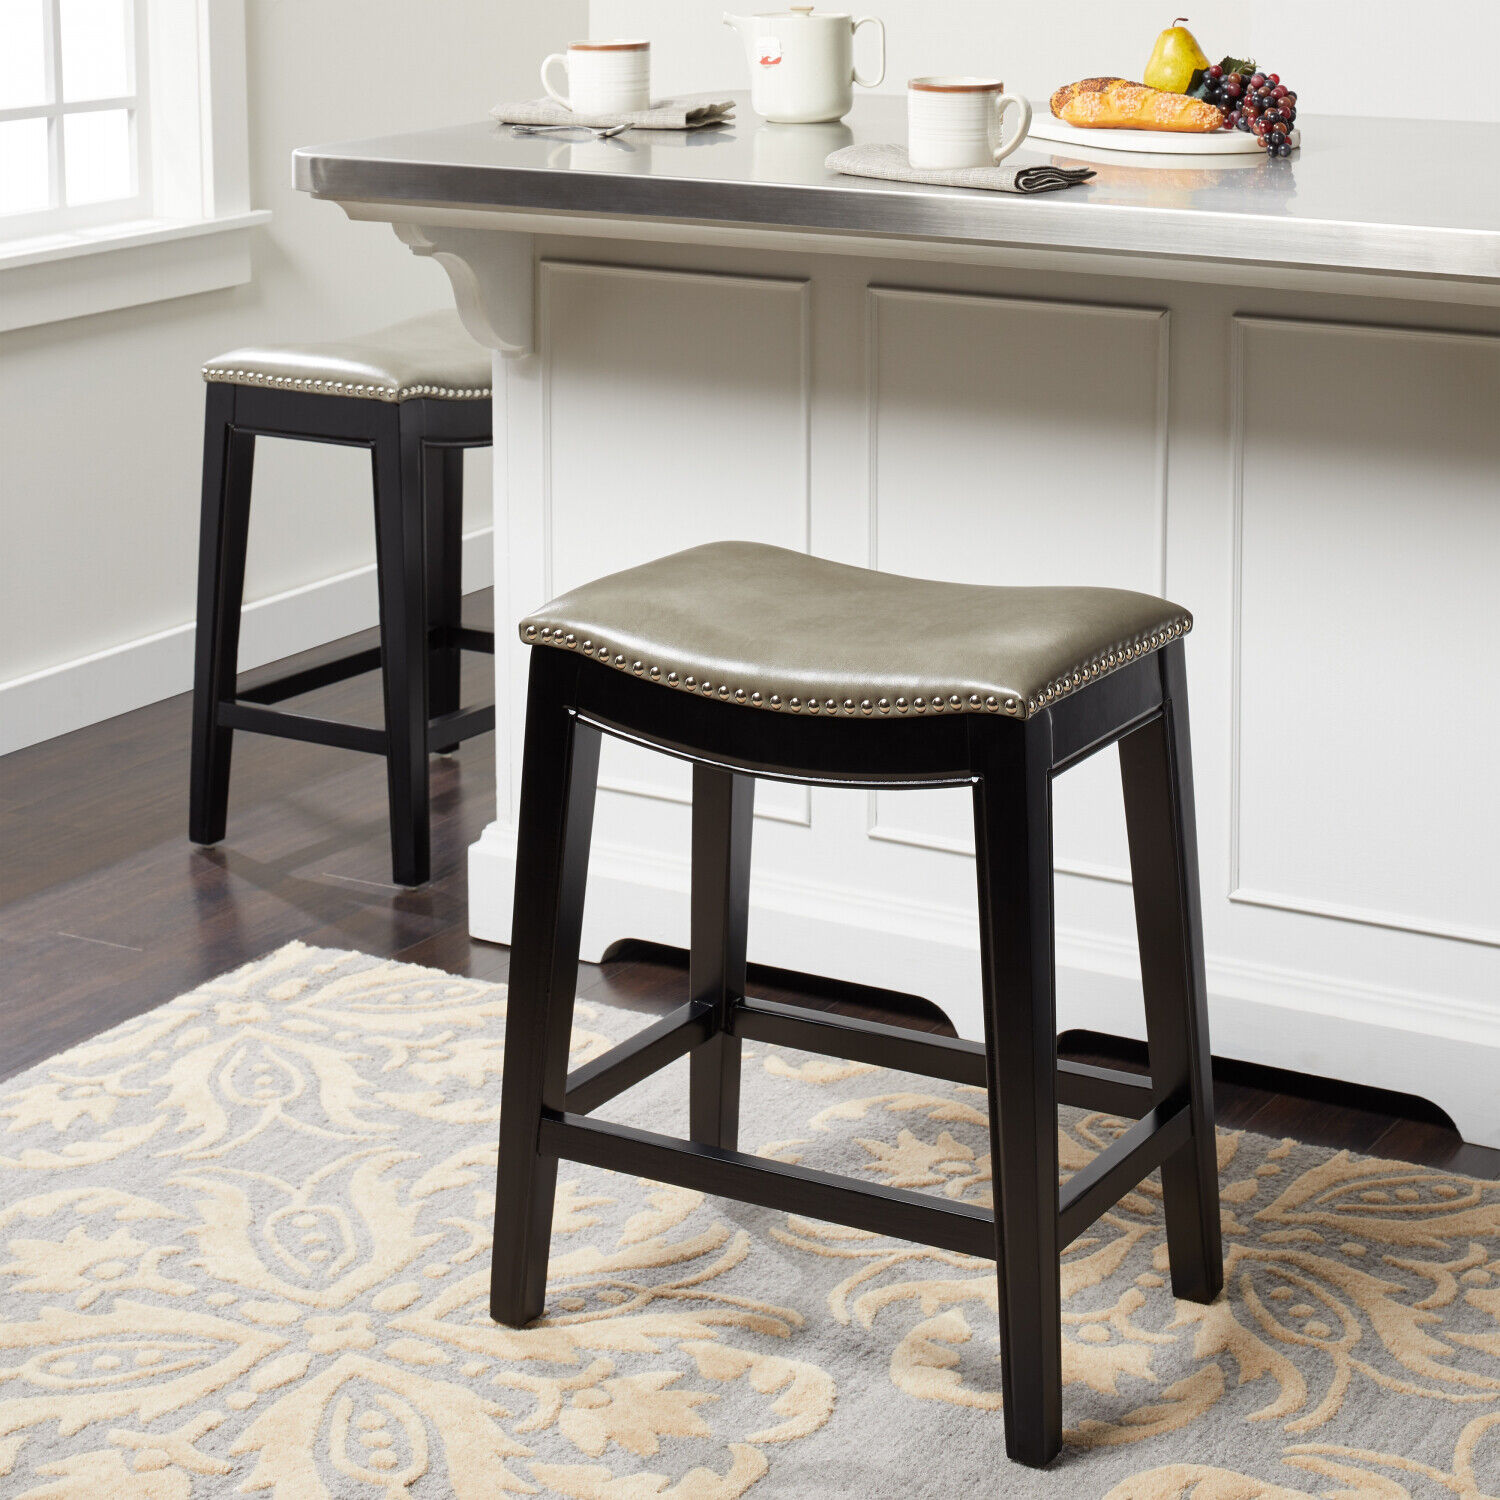 Abbyson Living Gray Leather Counter, Leather Bar Stools Nailhead Trim